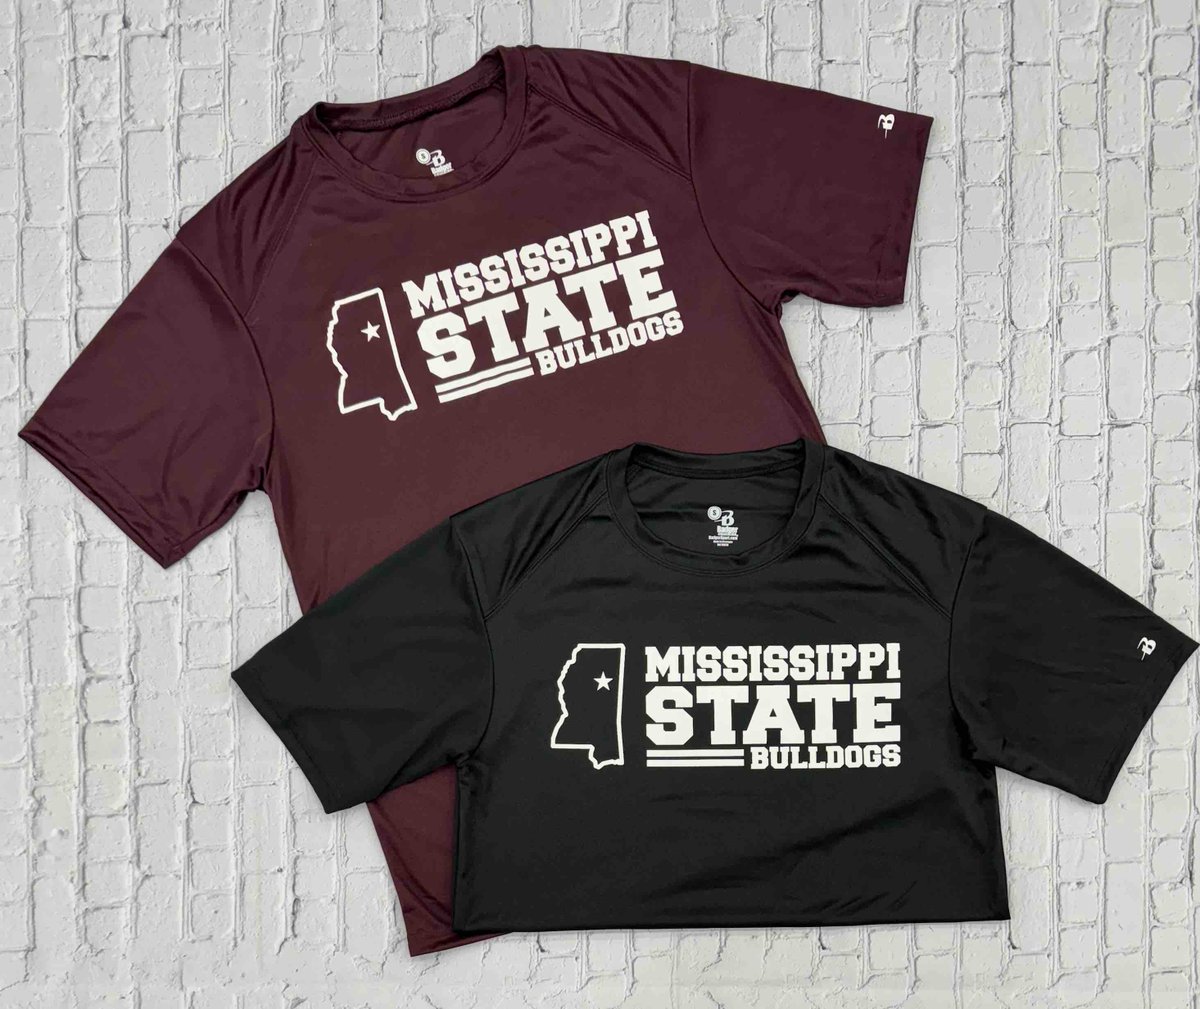 New arrivals: We are loving these new shirts. Stop by and grab yours today! 
Shop now: ow.ly/o9h050Rl9YU
#MississippiState #HailState